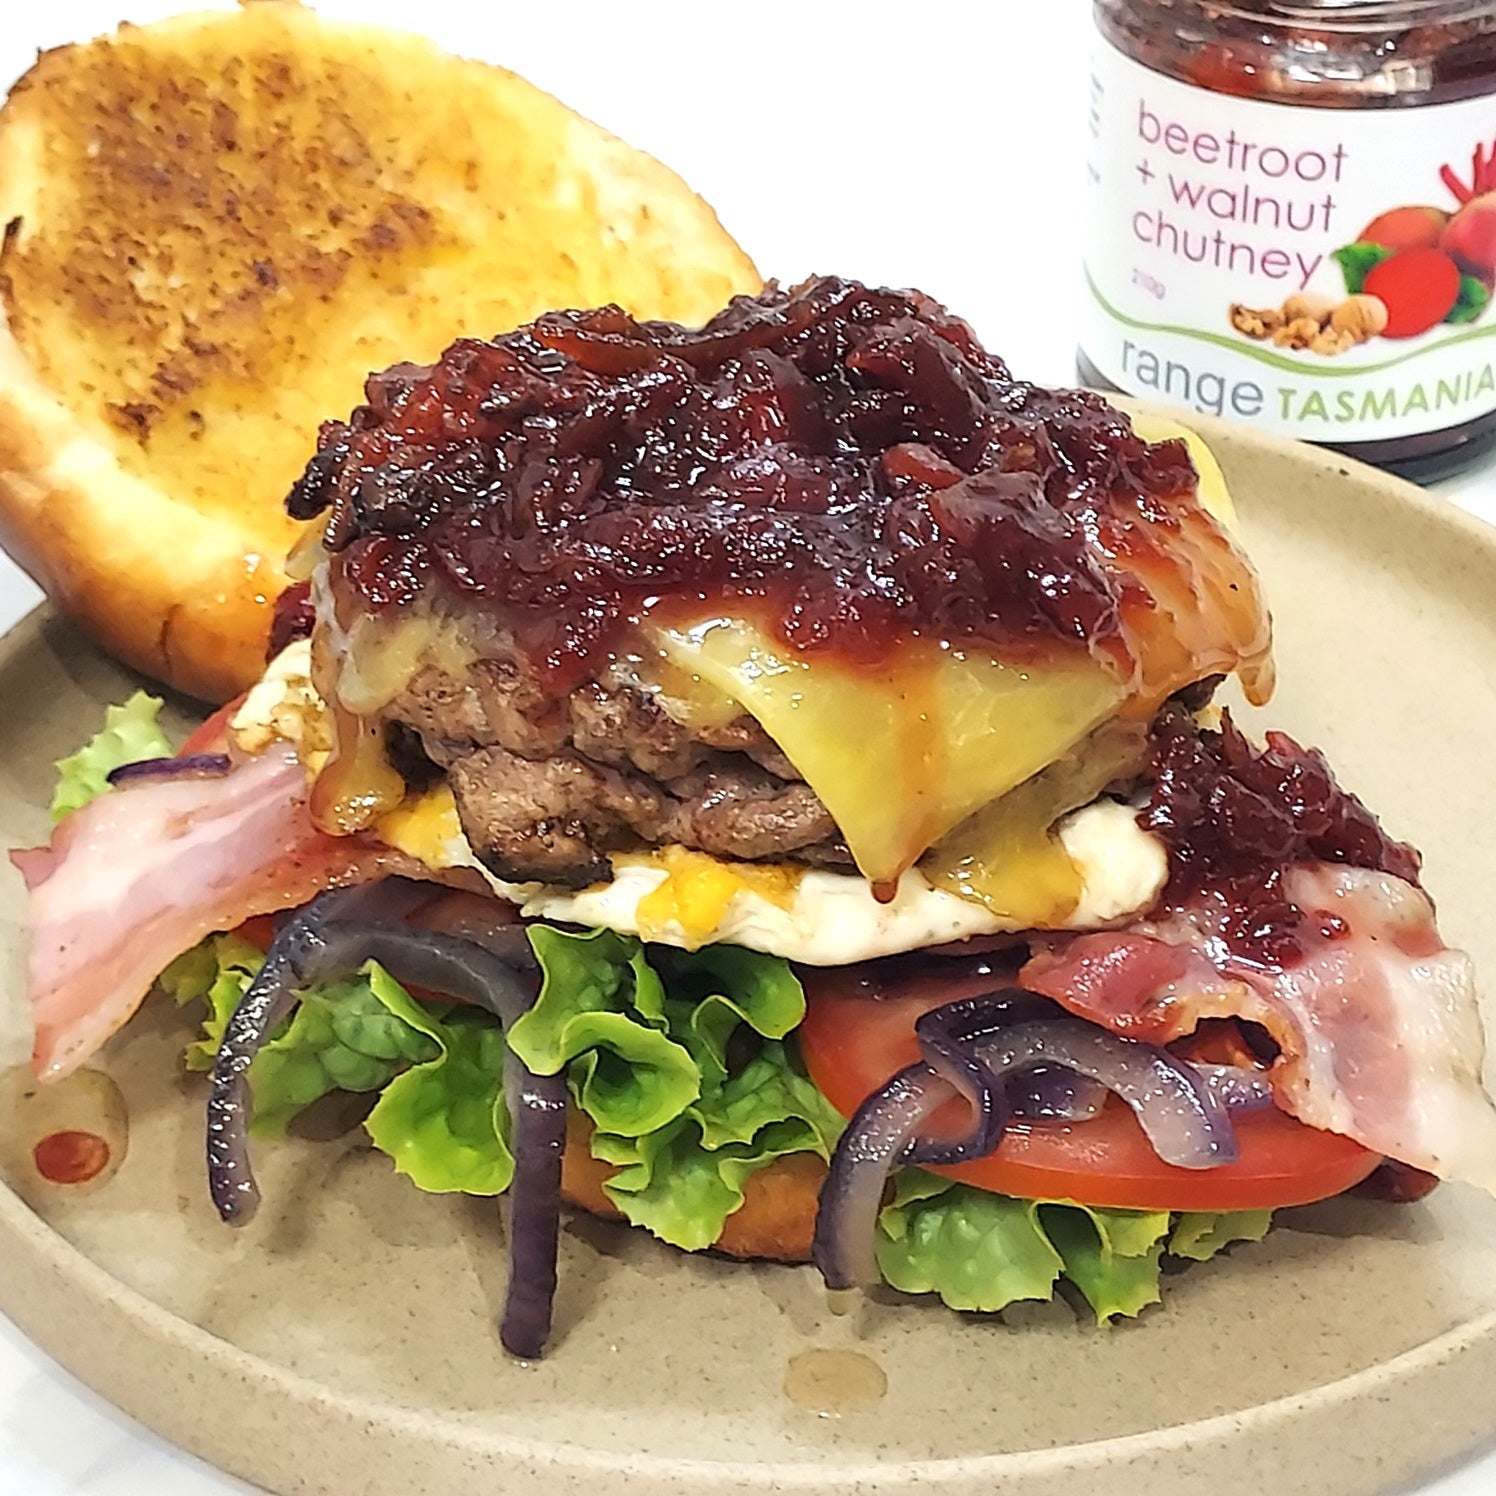 A hamburger with the lot topped with Range Tasmania's beetroot and walnut relish